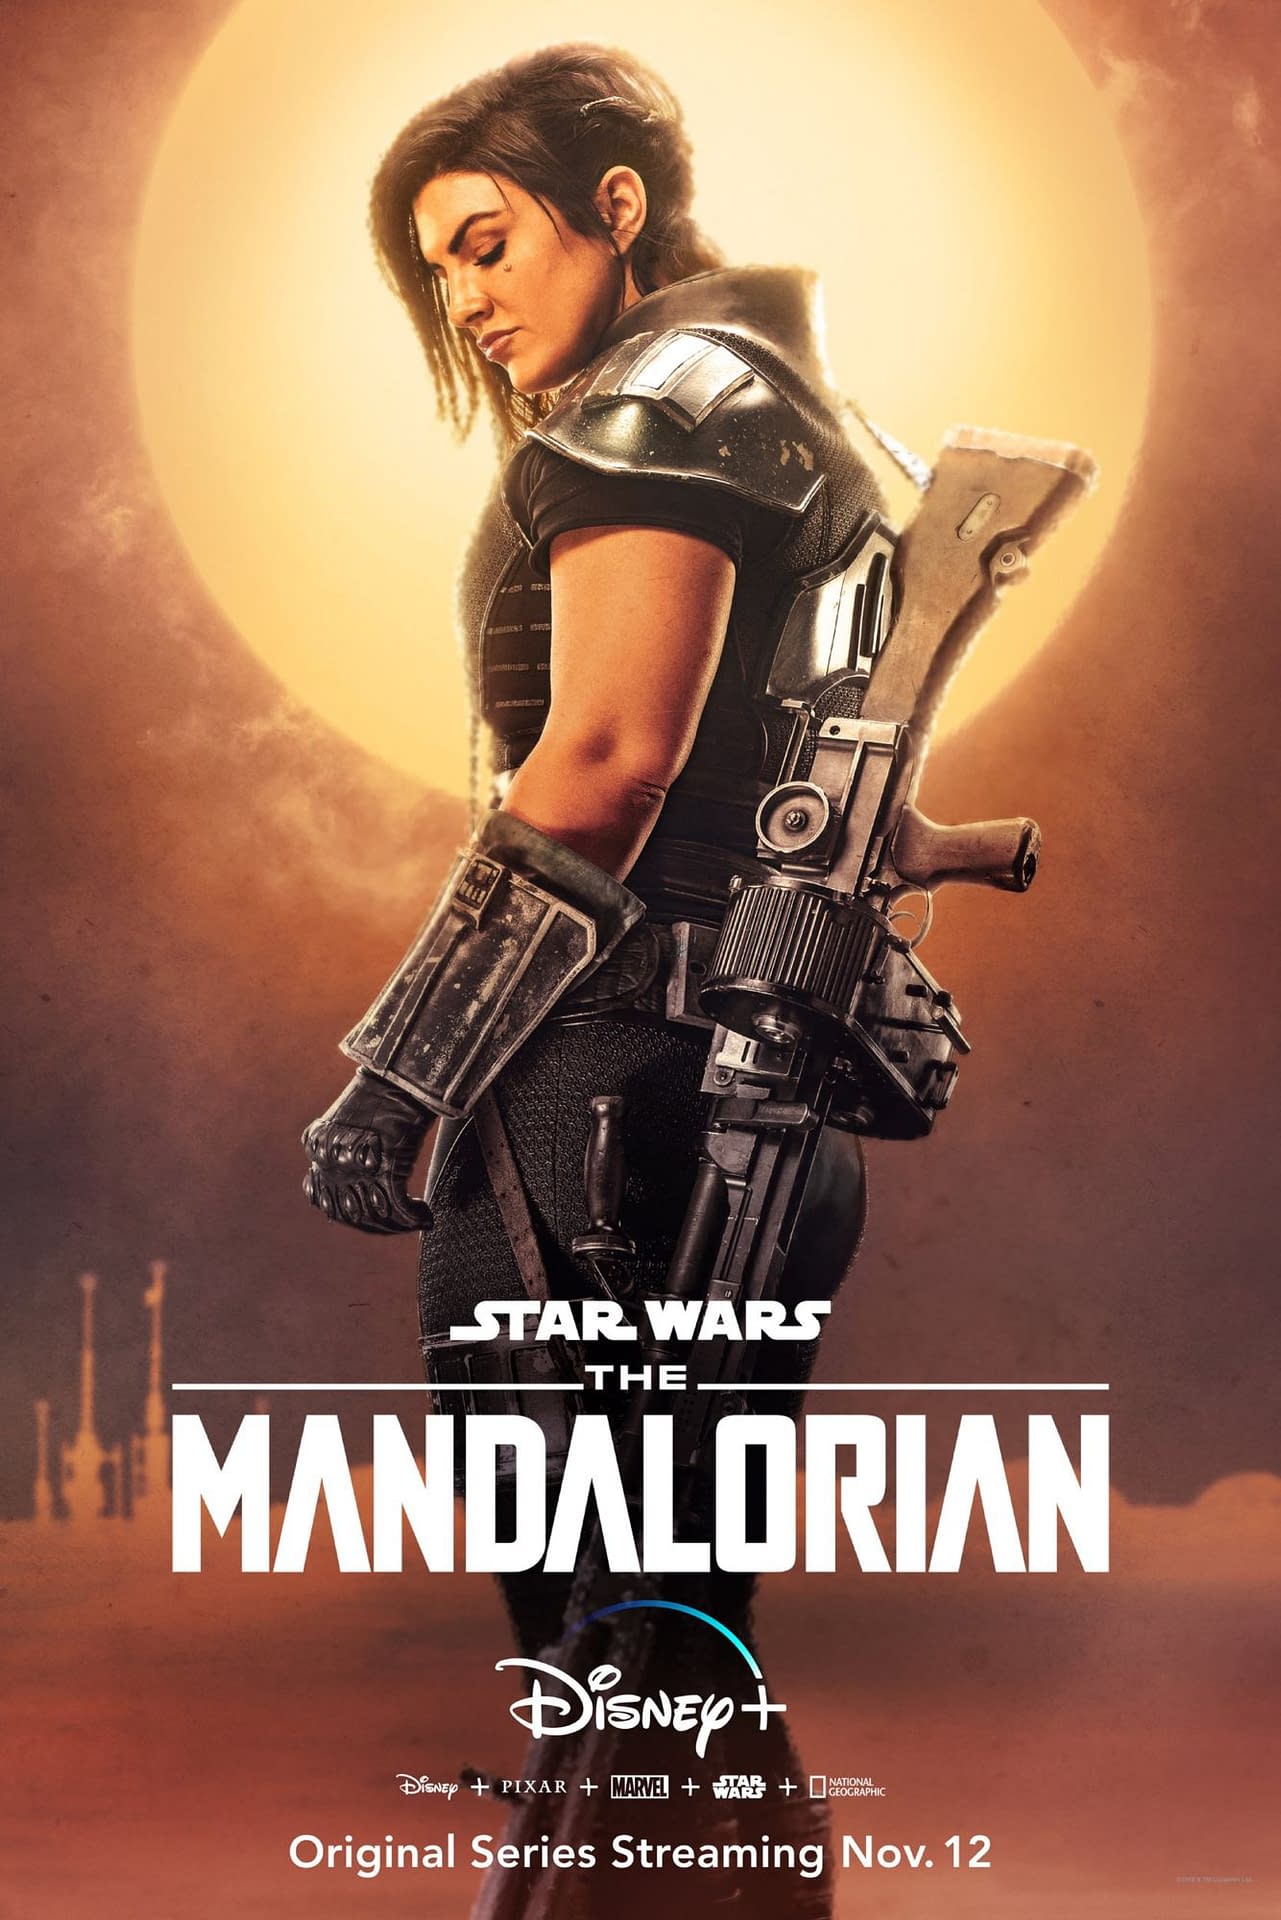 "The Mandalorian" Collects Its Bounty from Disney+: An Official Trailer